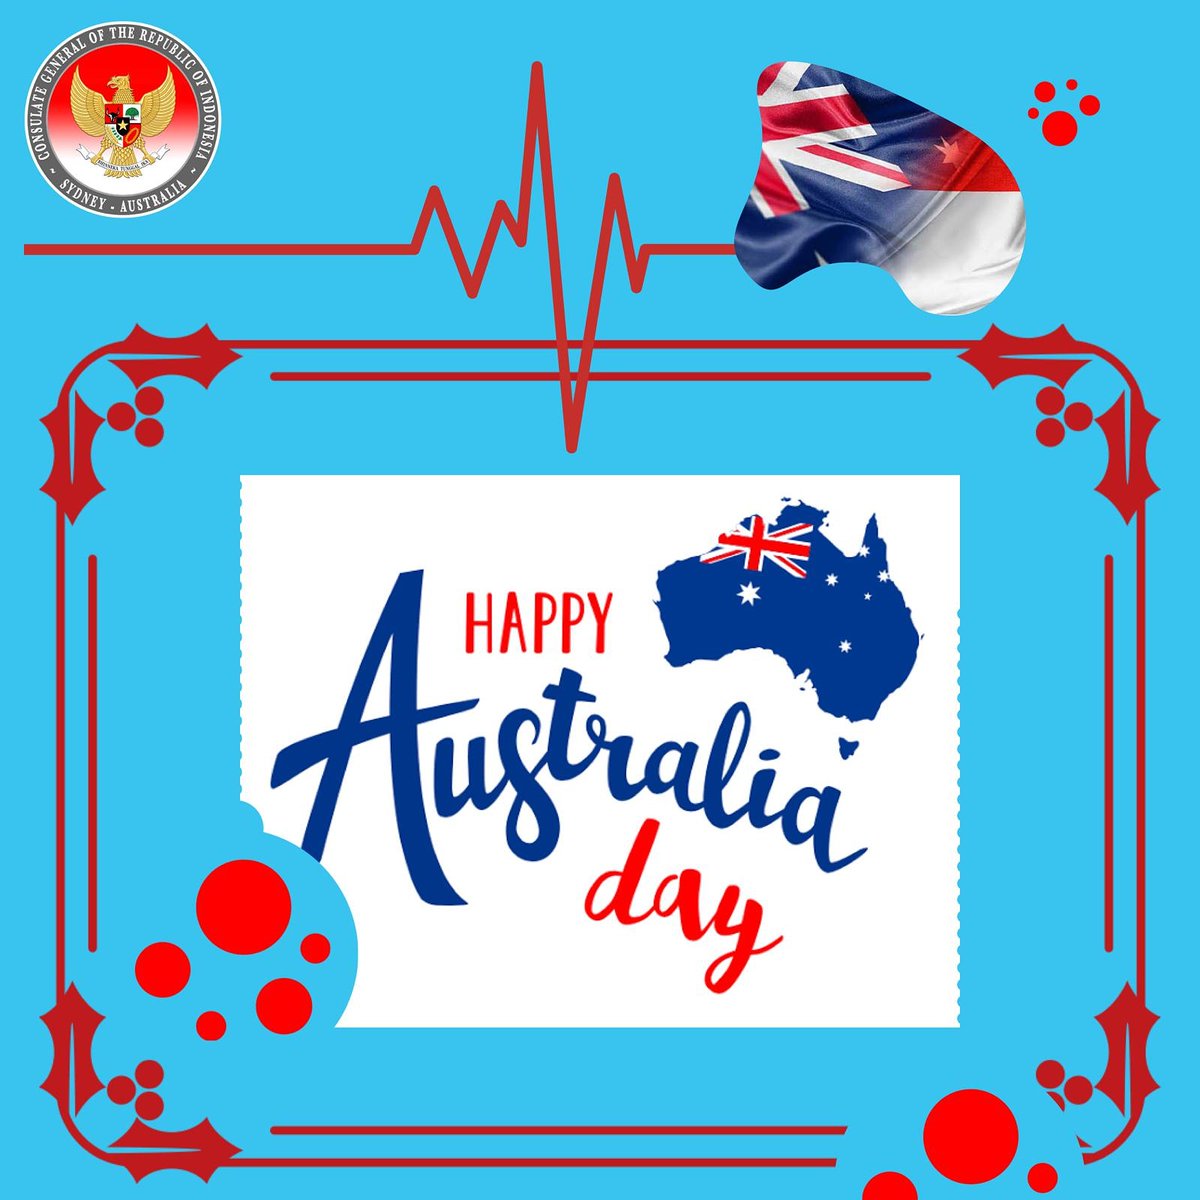 Happy Australia Day 2020.

“🇮🇩 & 🇦🇺 have a great partnership that’s getting stronger and stronger” #indonesianway #australiaandindonesia #partnership #comprehensivestrategicpartnership #csp #iacepa